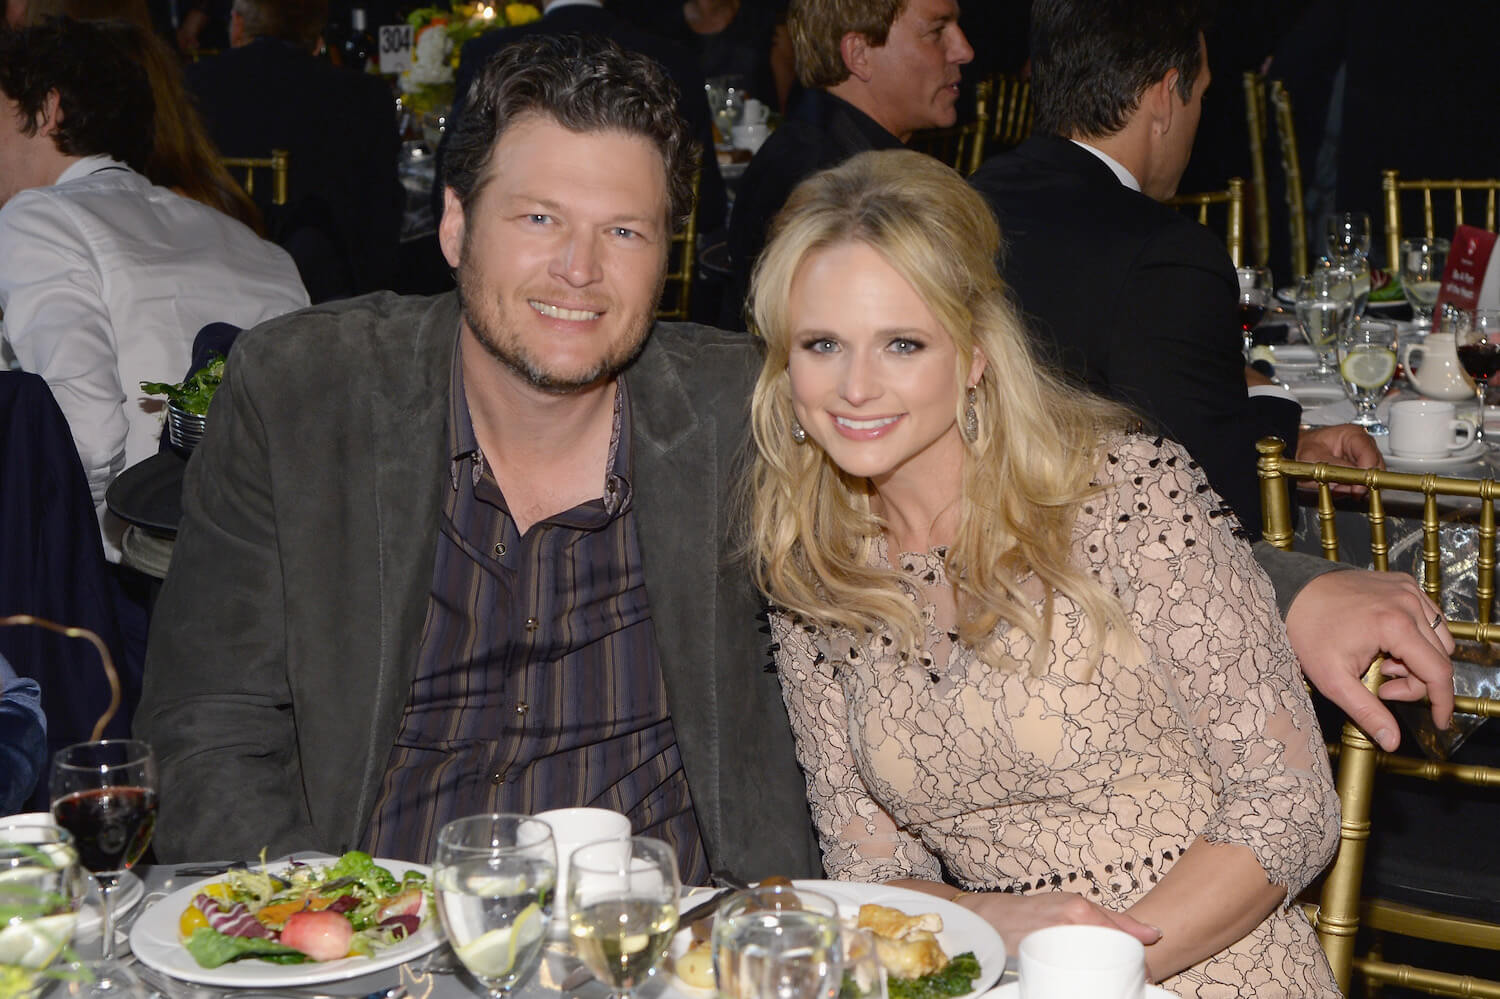 Blake Shelton with his arm around Miranda Lambert in 2014. They're smiling with dinner in front of them at a table